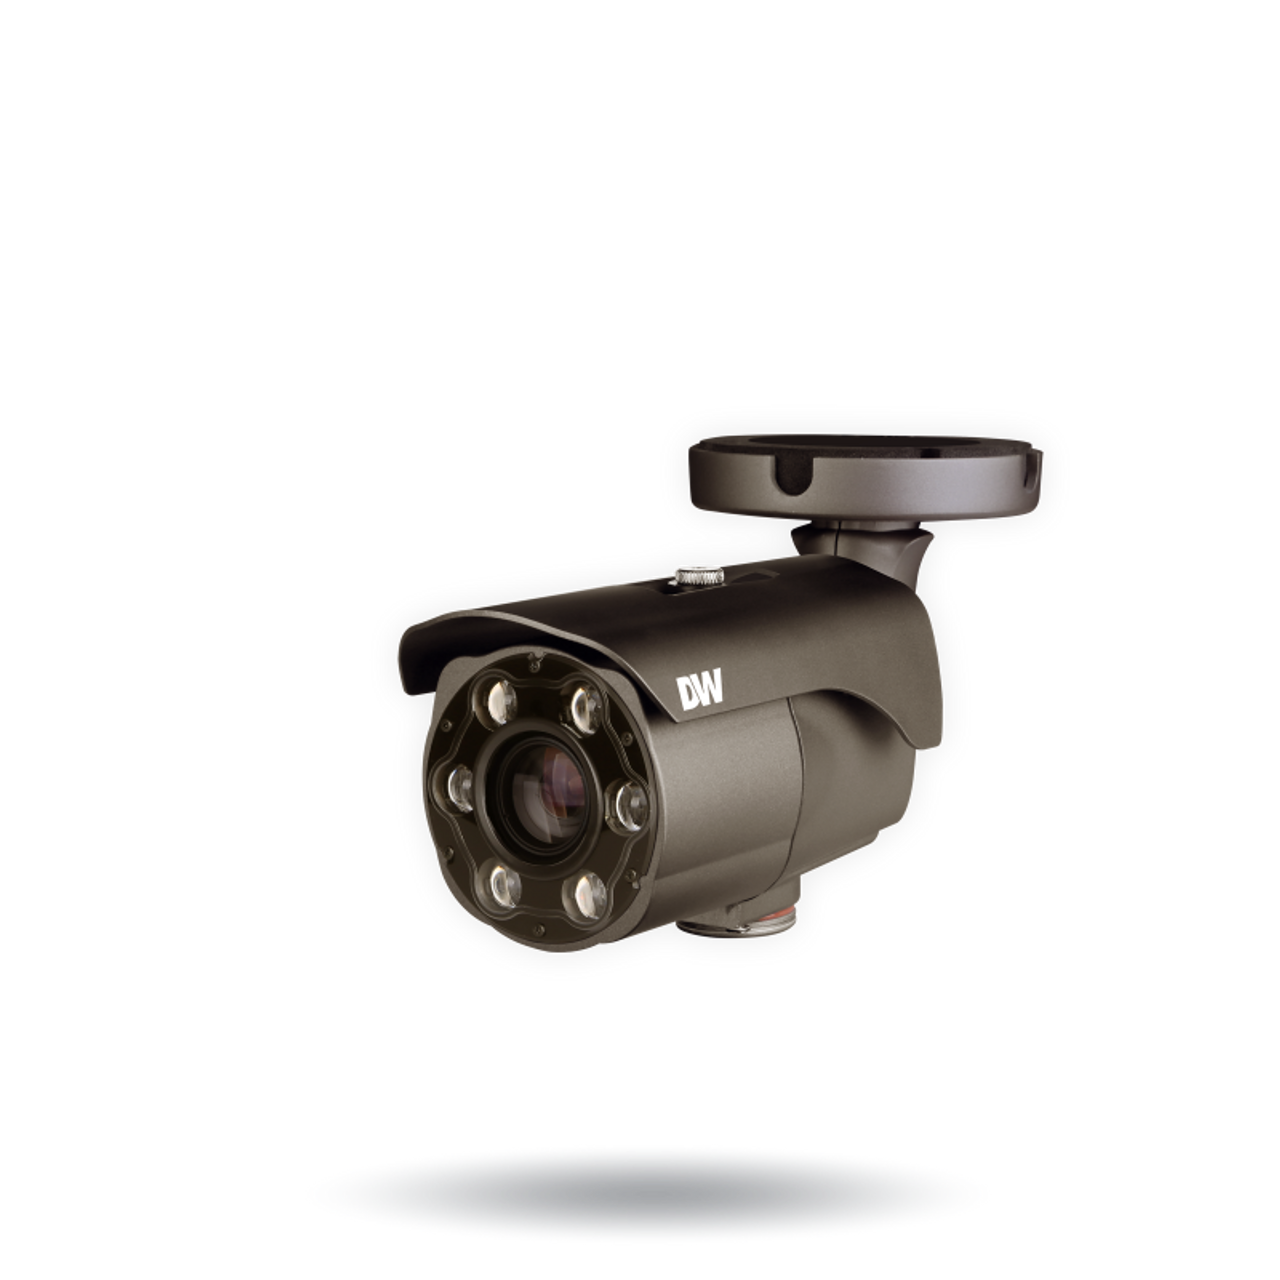 Digital Watchdog DWC-MB44Wi650C5 4MP Night Vision Outdoor All-in-One Bullet IP Security Camera with 6~50mm lens, 512GB Storage